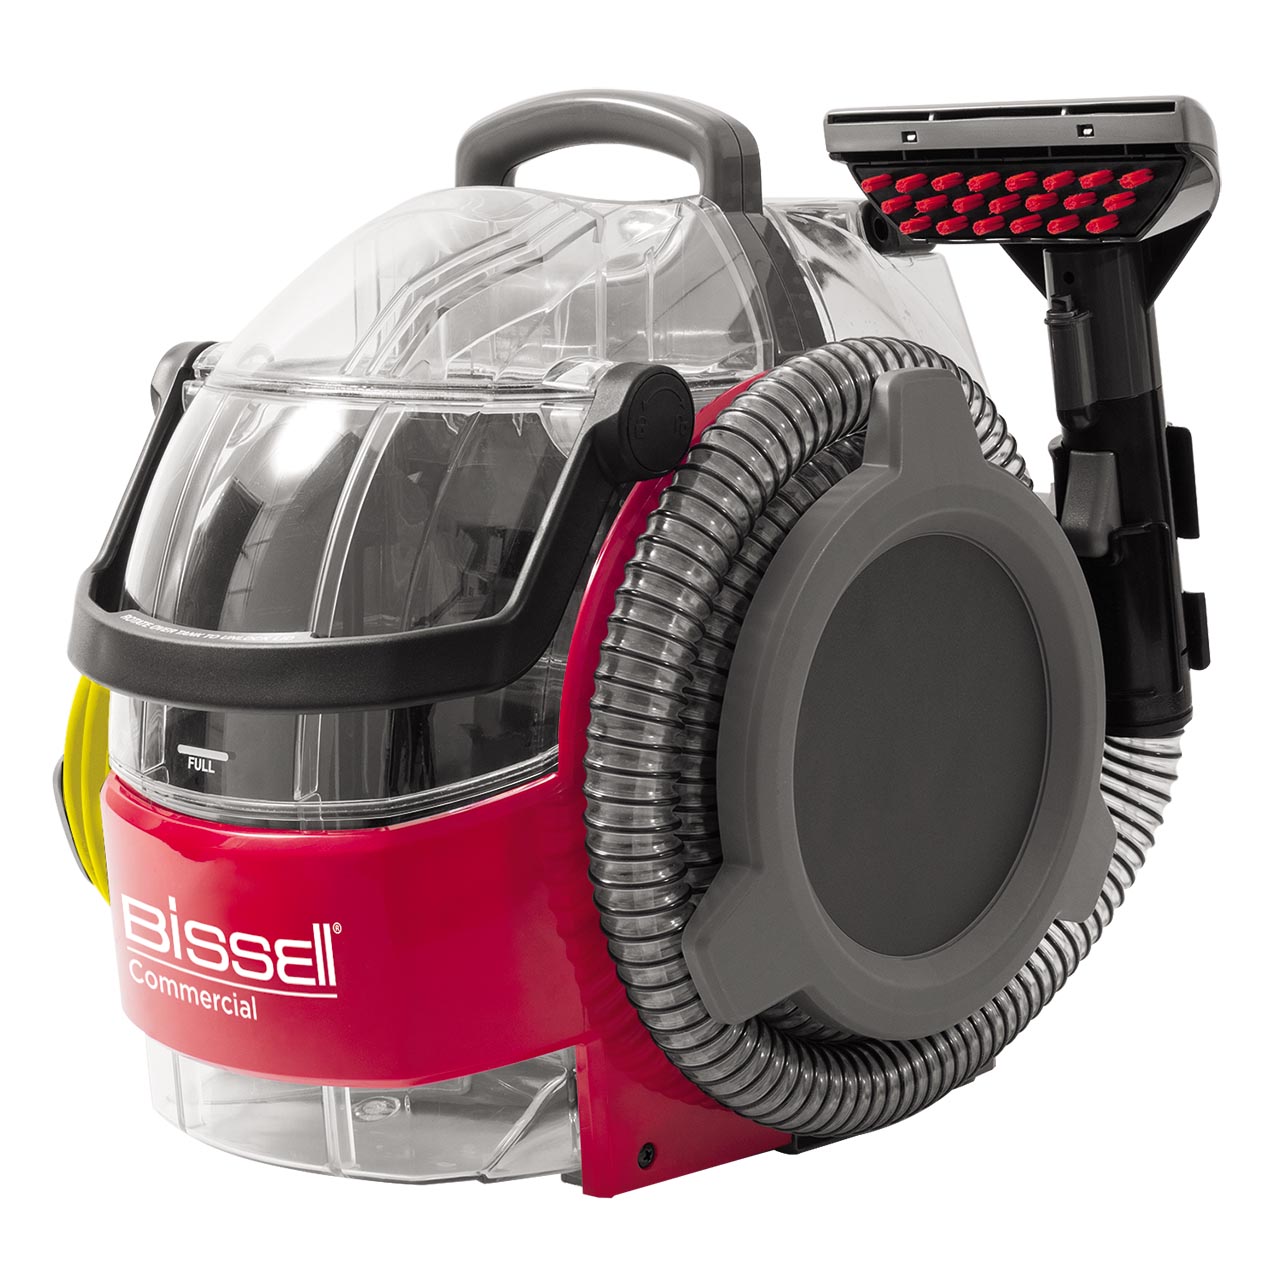 Bissell SC100 Commercial Portable Spot Extraction Cleaner